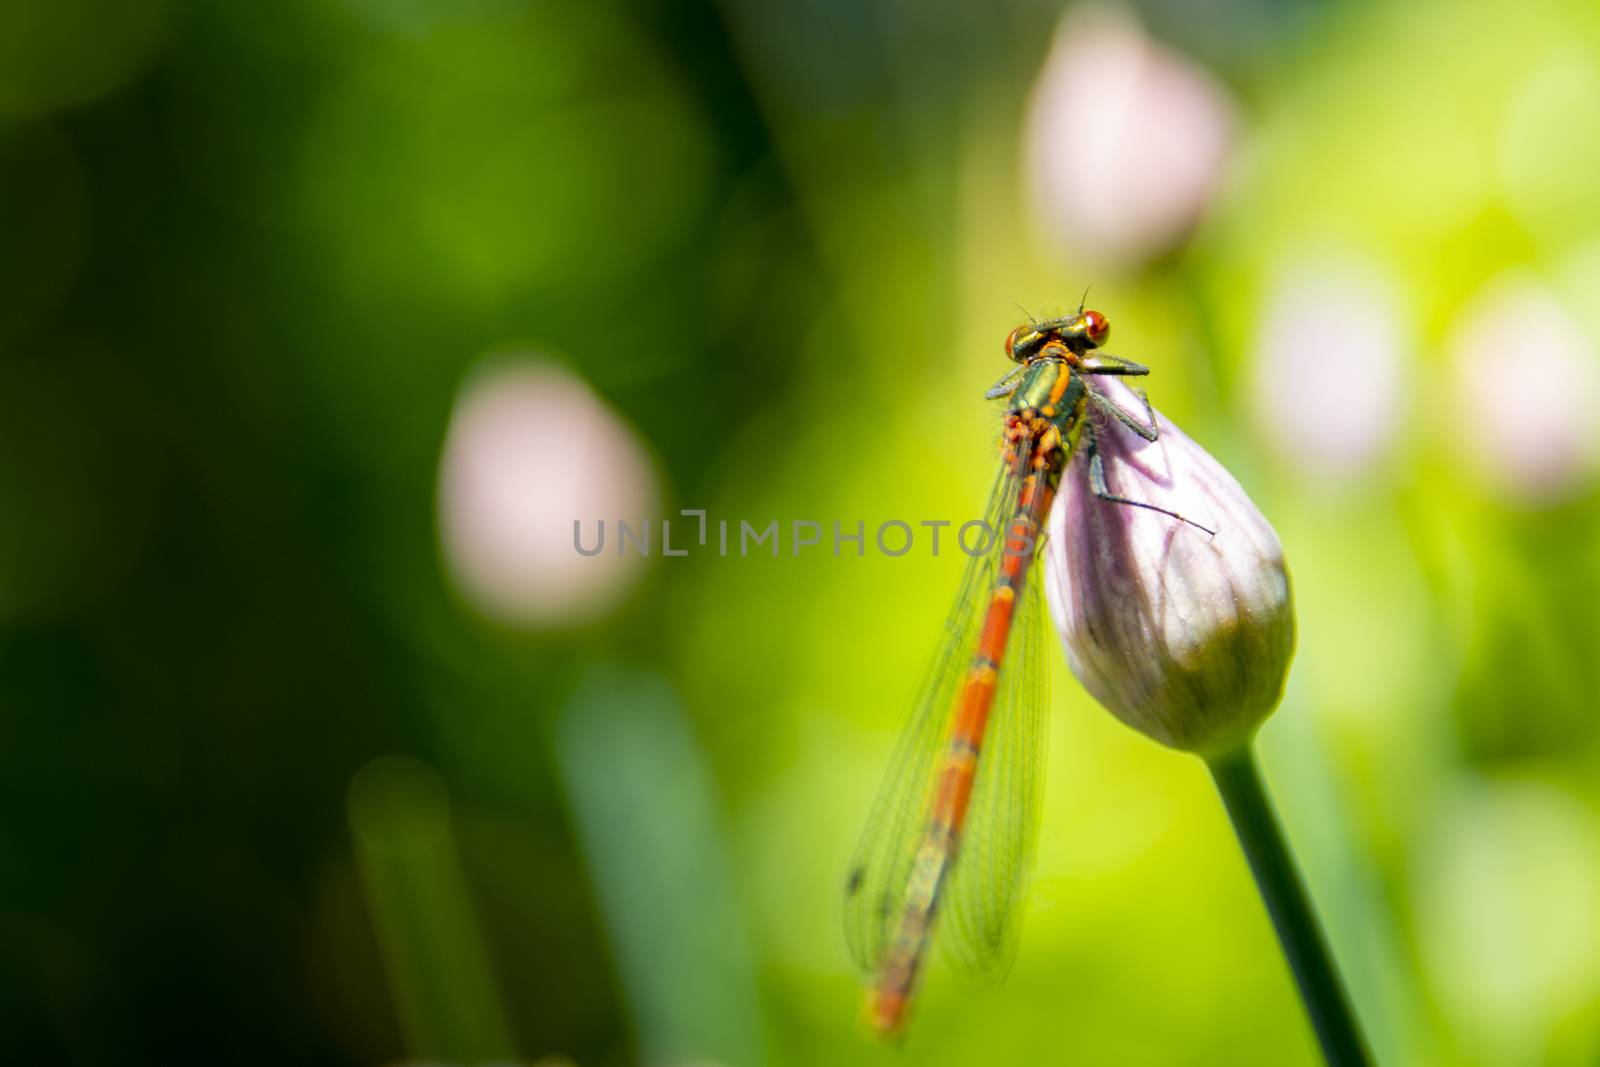 Dragonfly sitting on a closed chive flower bud. Beauty in nature.